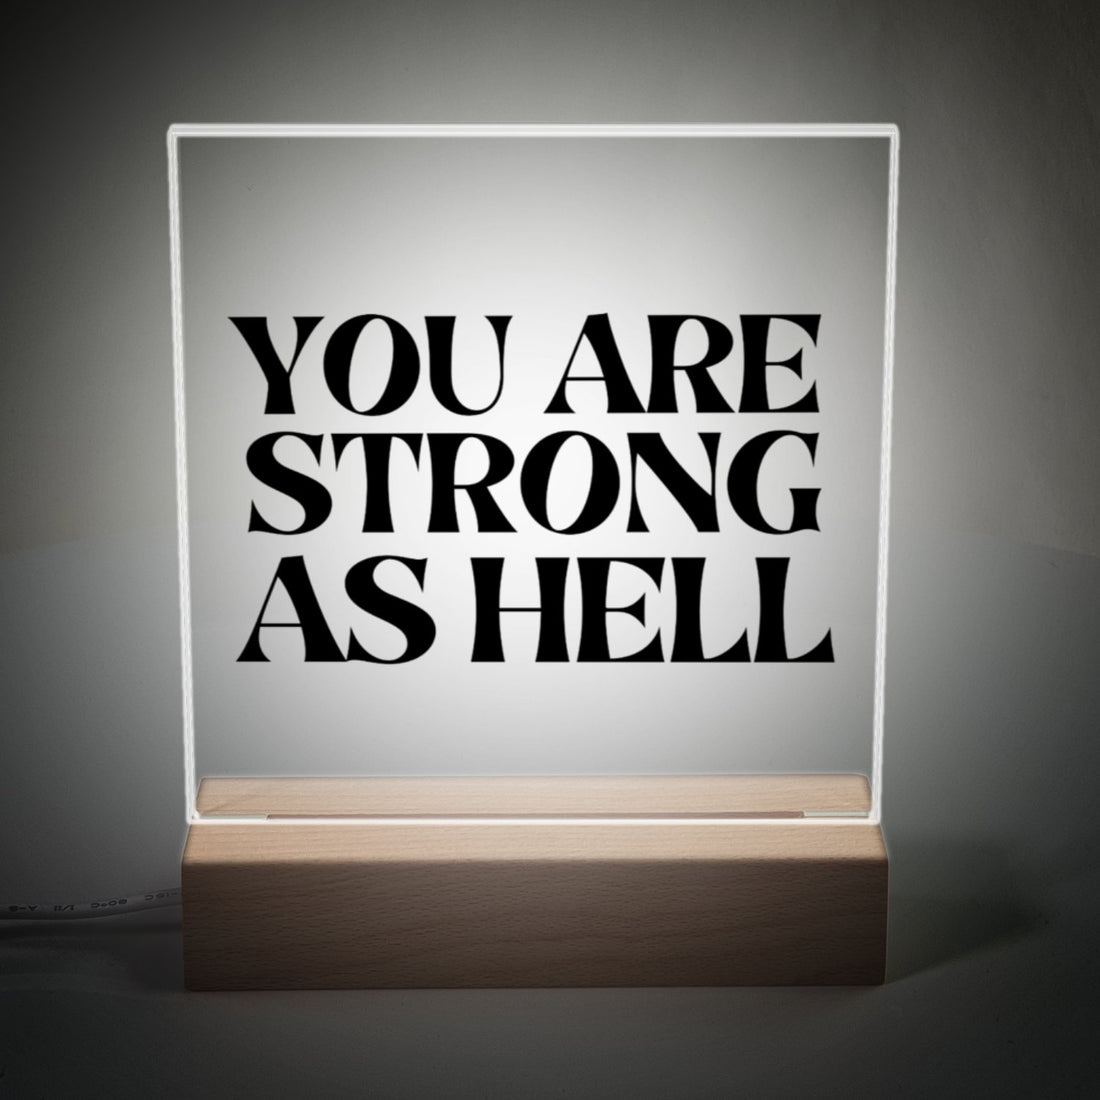 Strong As Hell Plaque - Positively Sassy - Strong As Hell Plaque